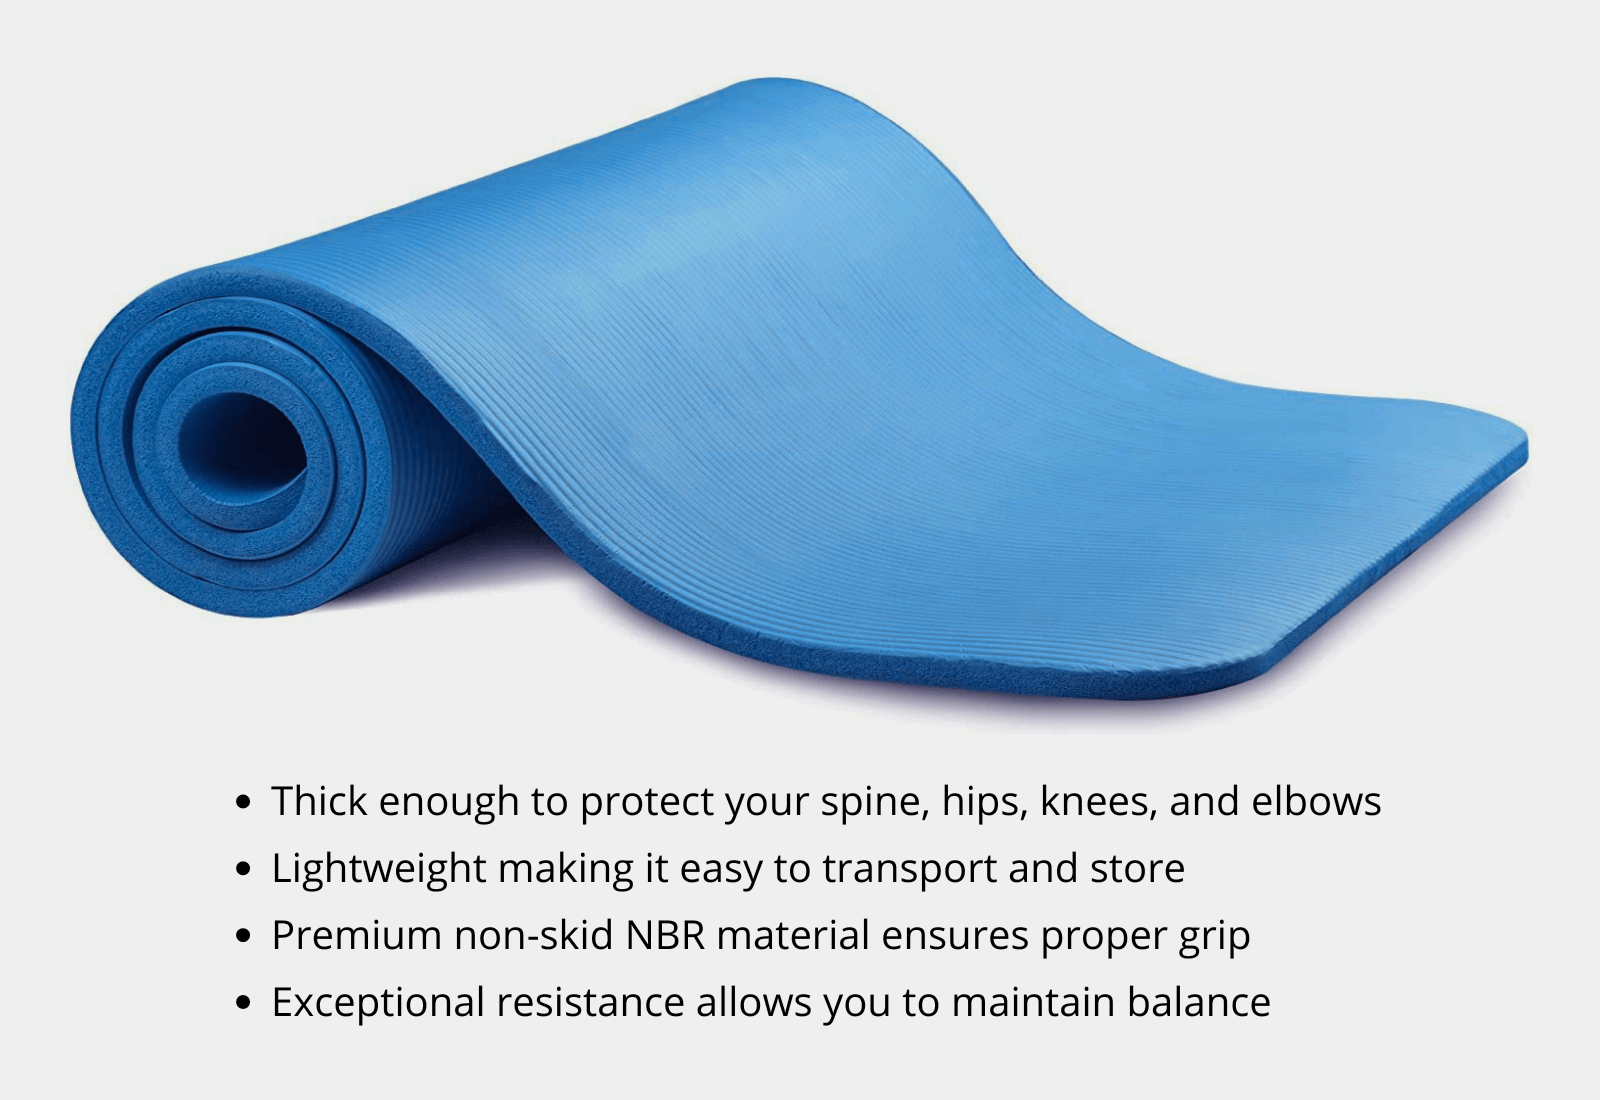 Yoga mat with carrying strap, I.FIV5